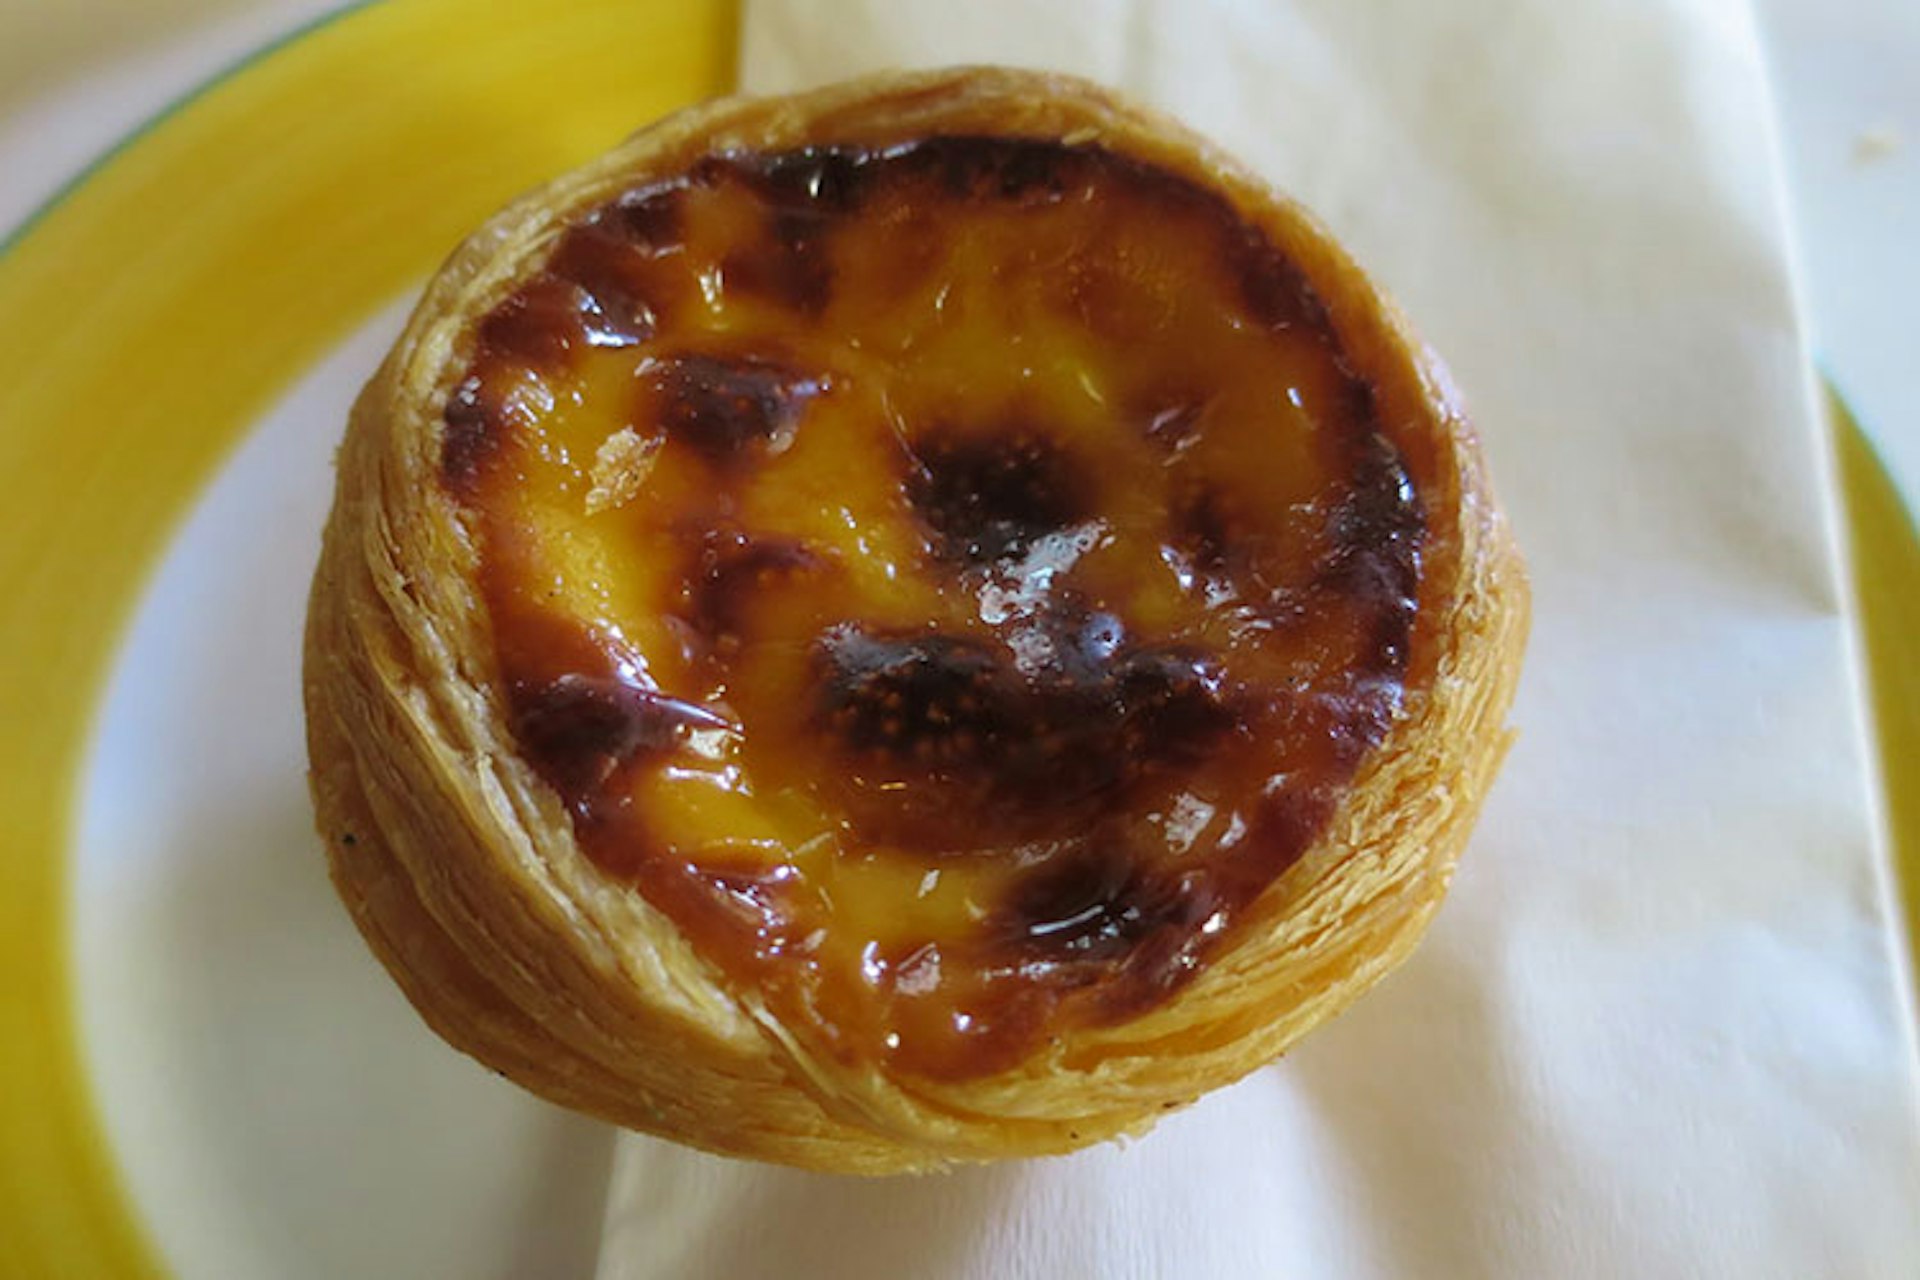 Macanese egg tart. Image by Megan Eaves / Lonely Planet